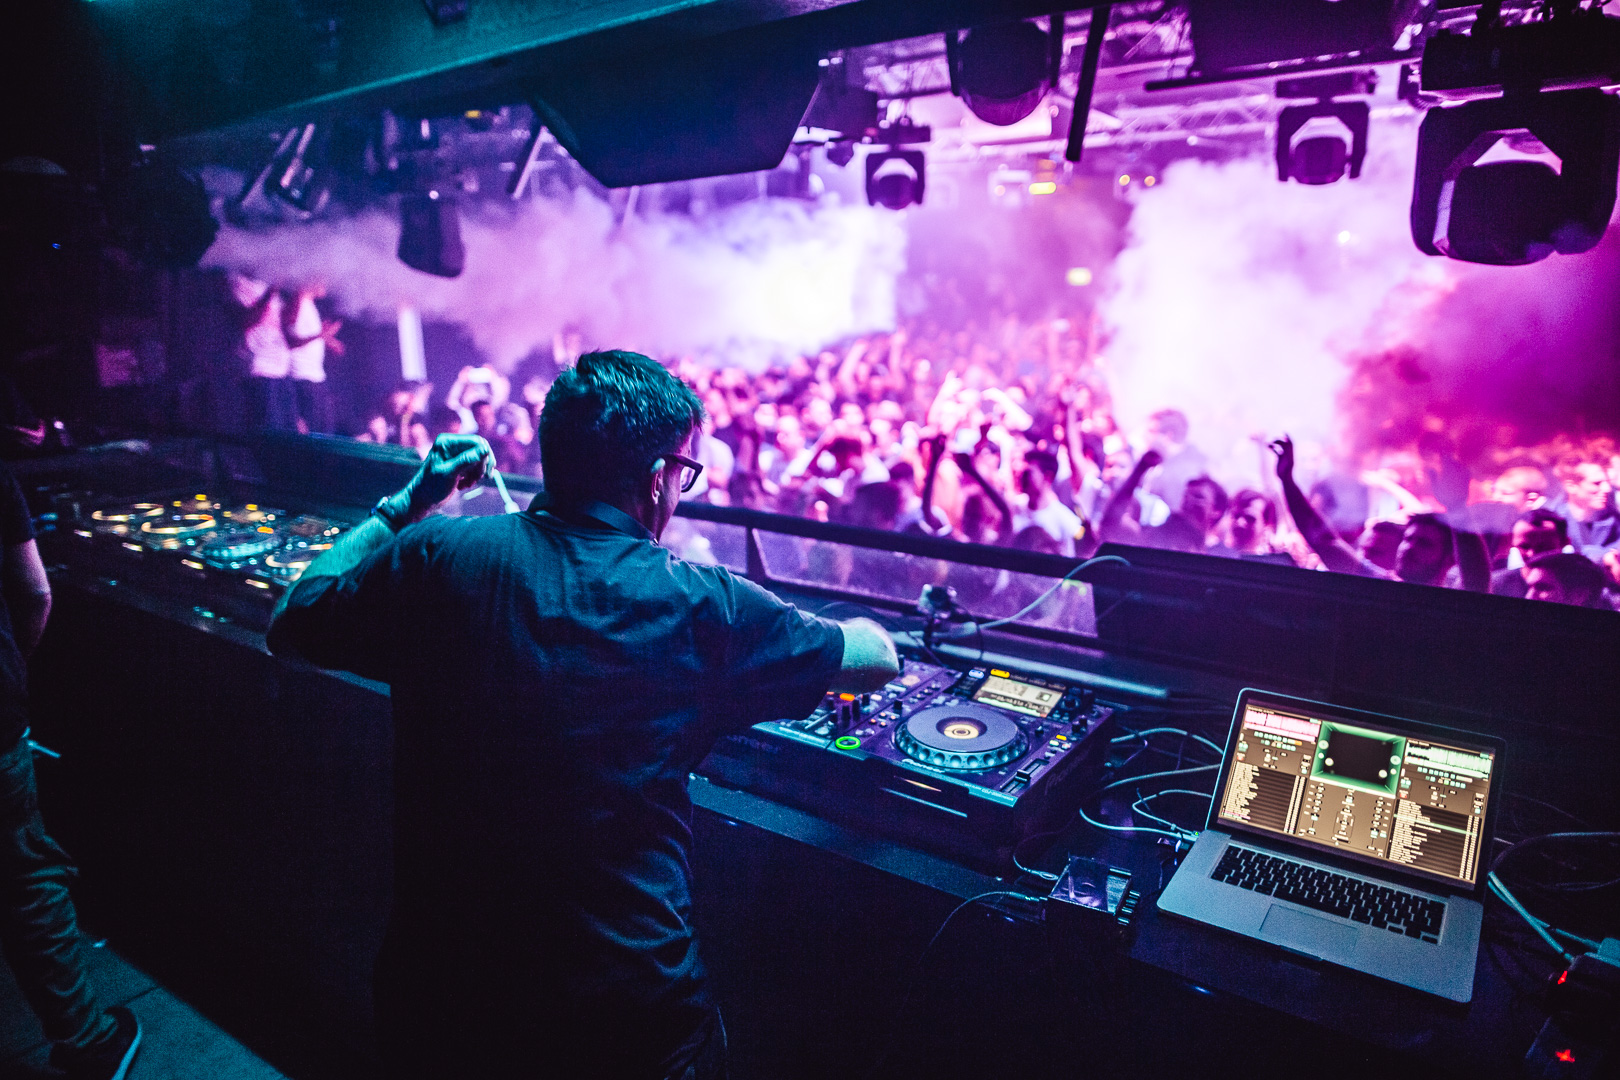 Denmark shouldn't reopen clubs and venues as infections rise, state expert says